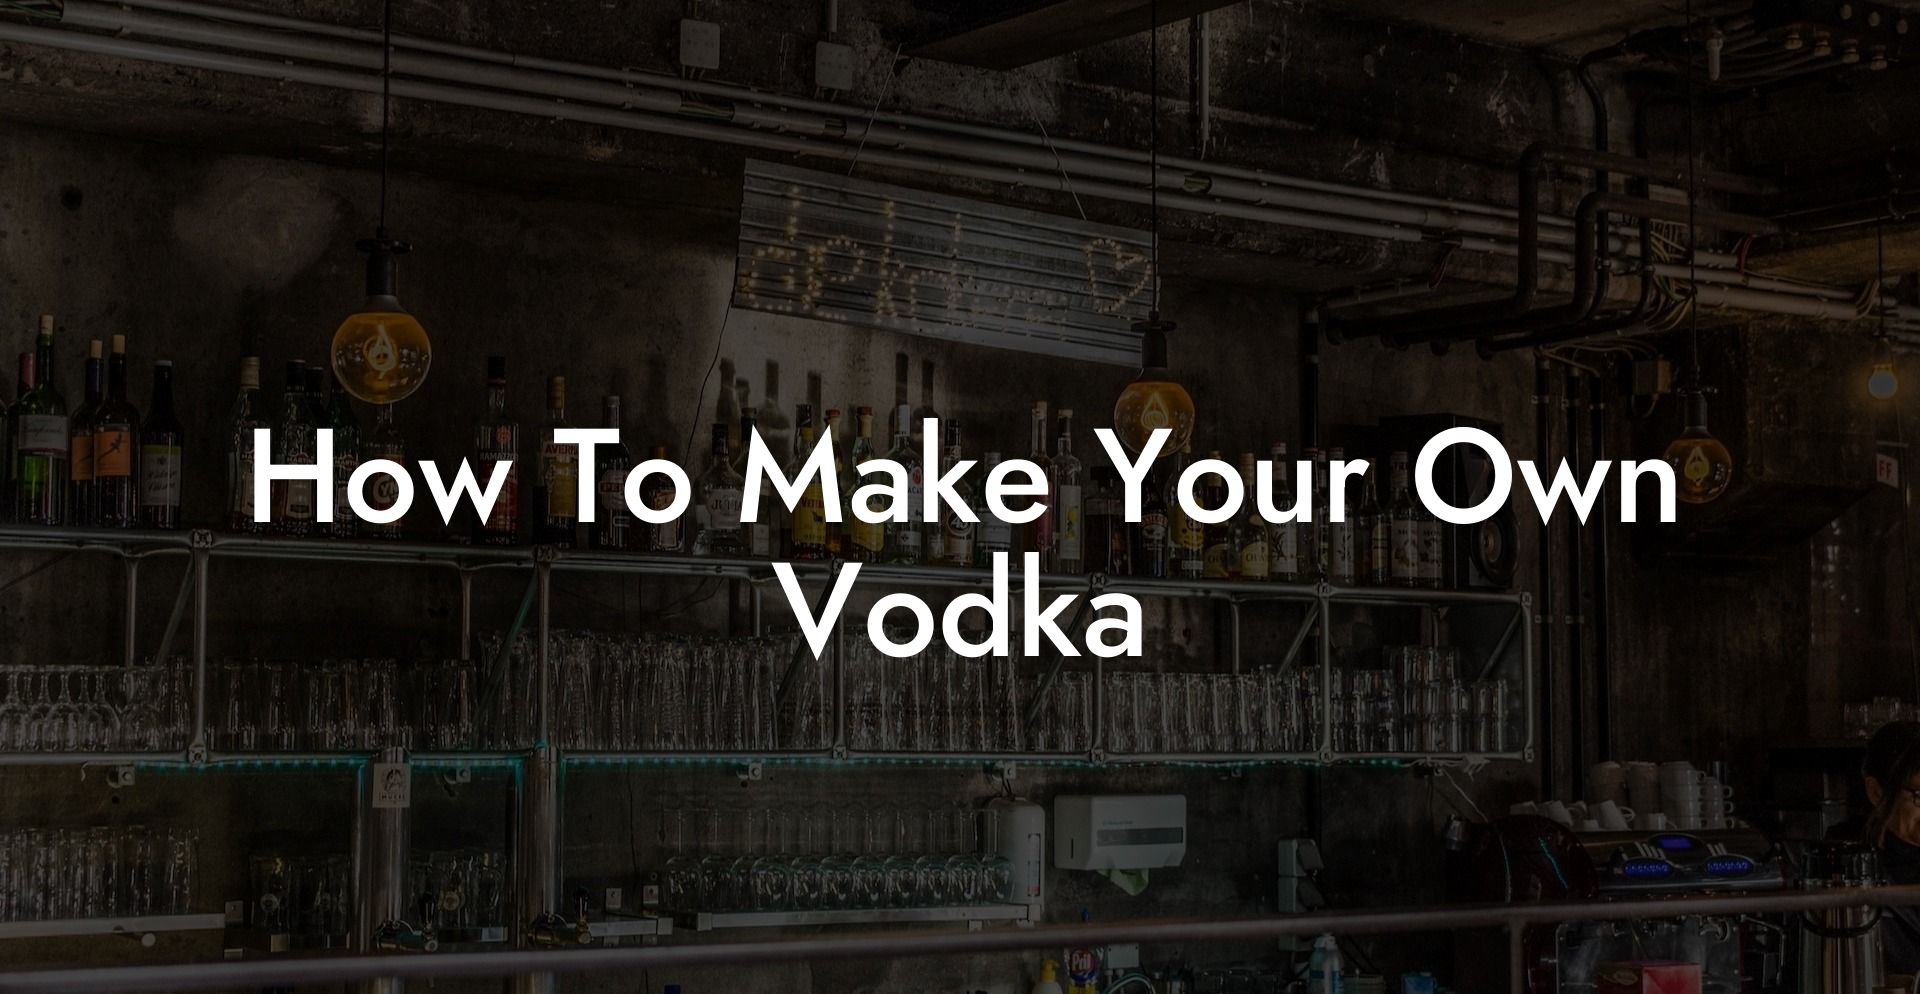 How To Make Your Own Vodka